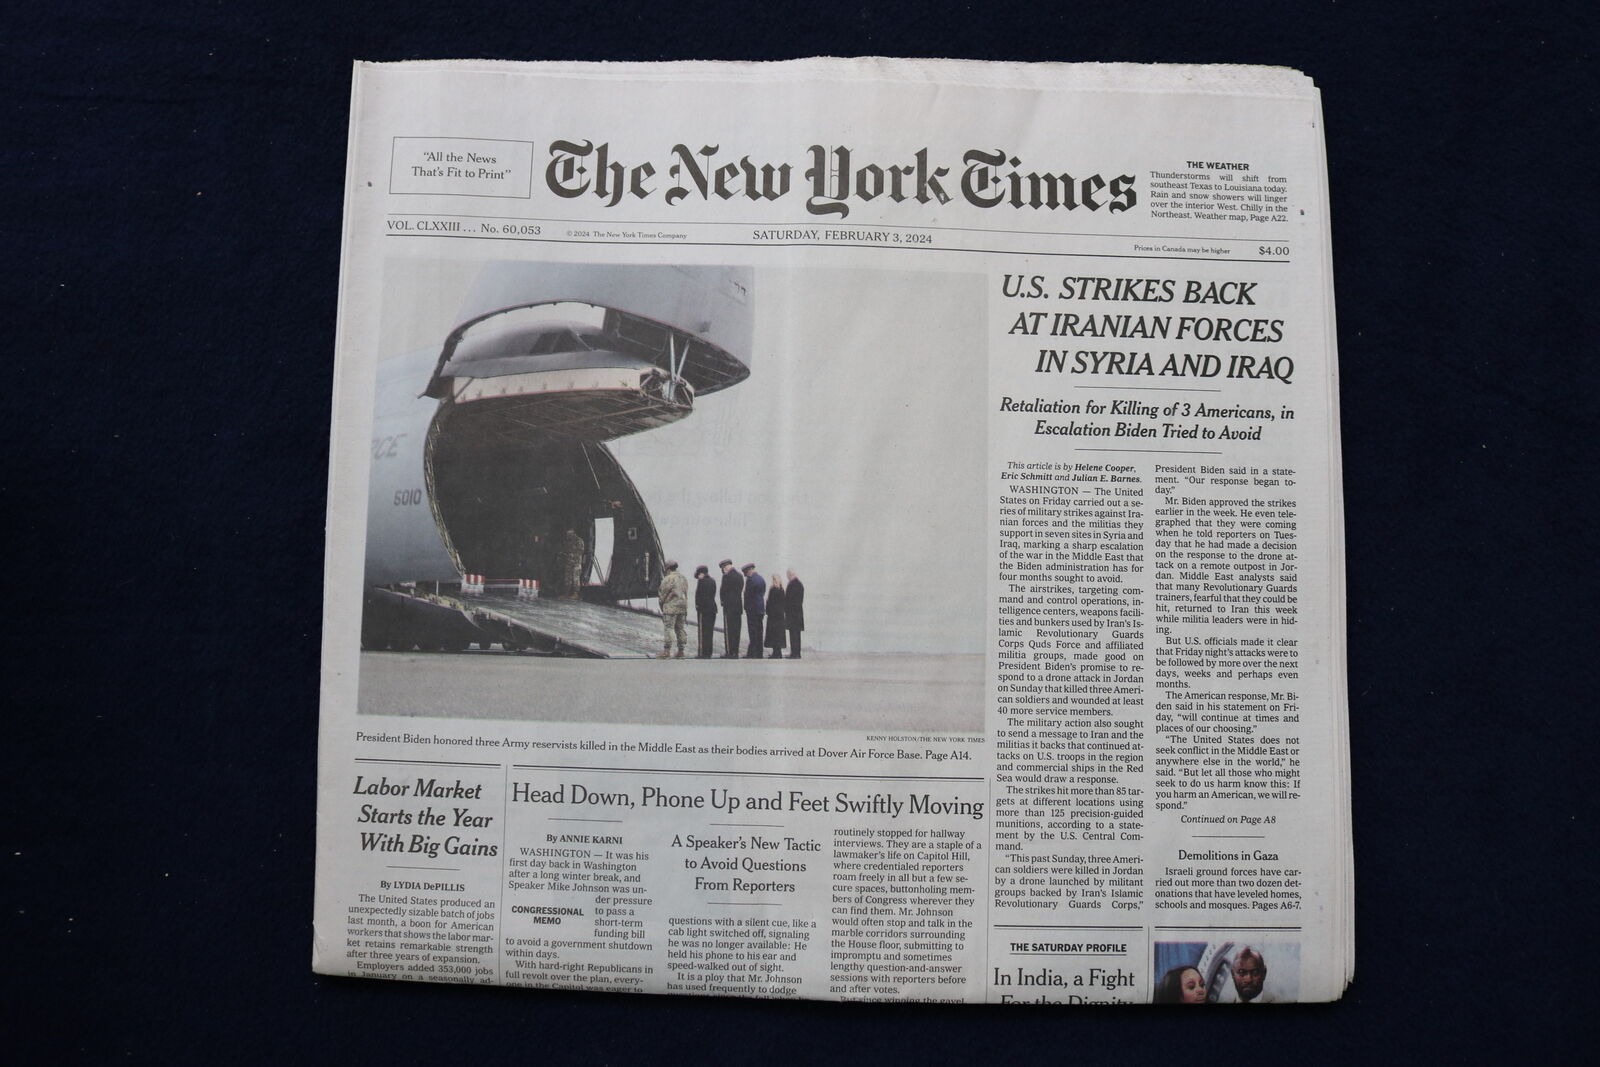 2024 FEB 3 NEW YORK TIMES - U.S. STRIKES BACK AT IRANIAN FORCERS IN SYRIA & IRAQ